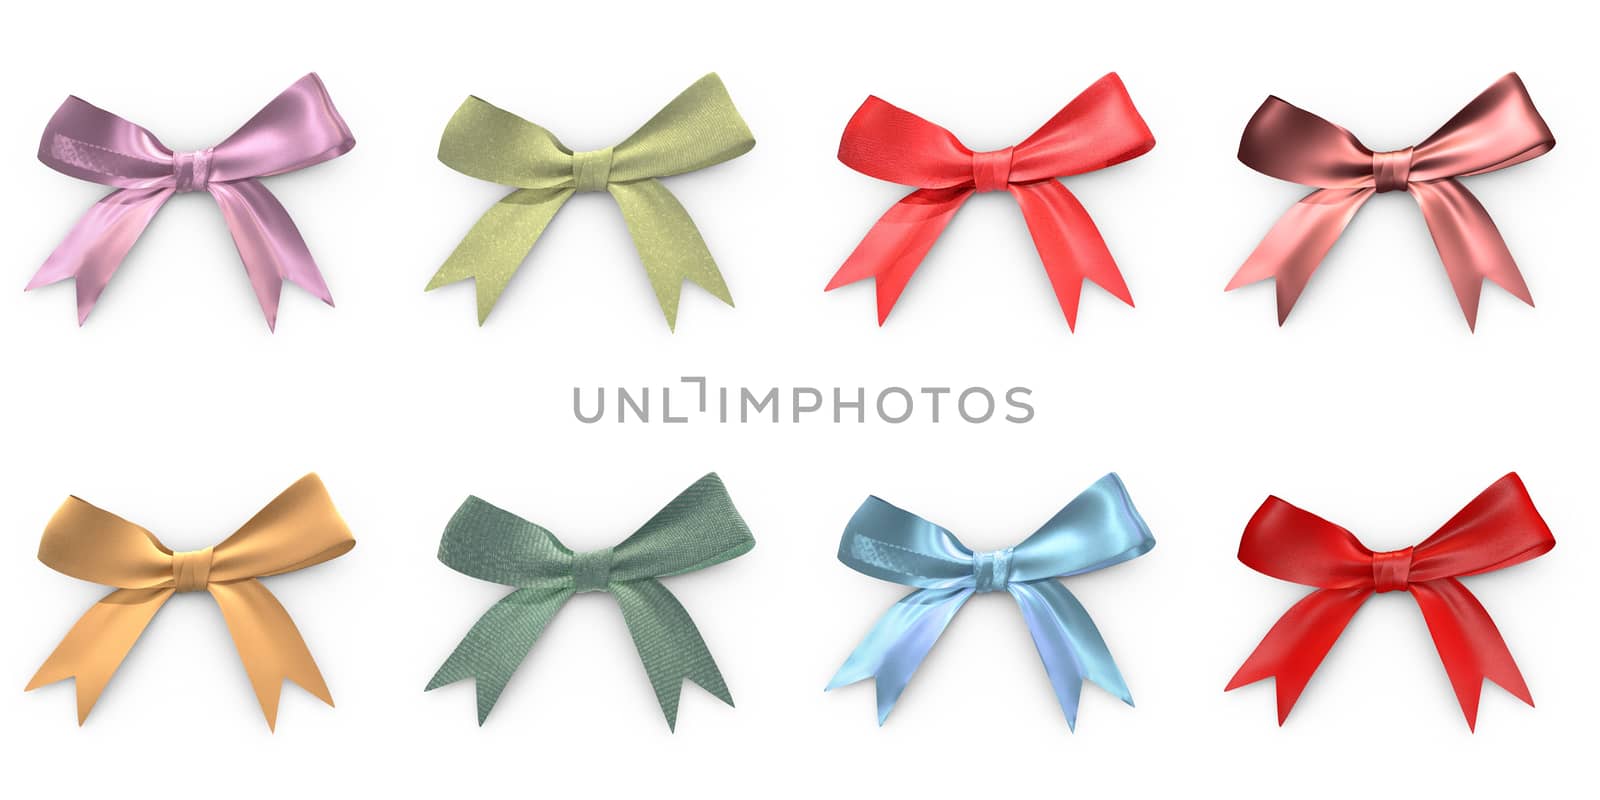 Several Christmas ribbons with different materials by ytjo